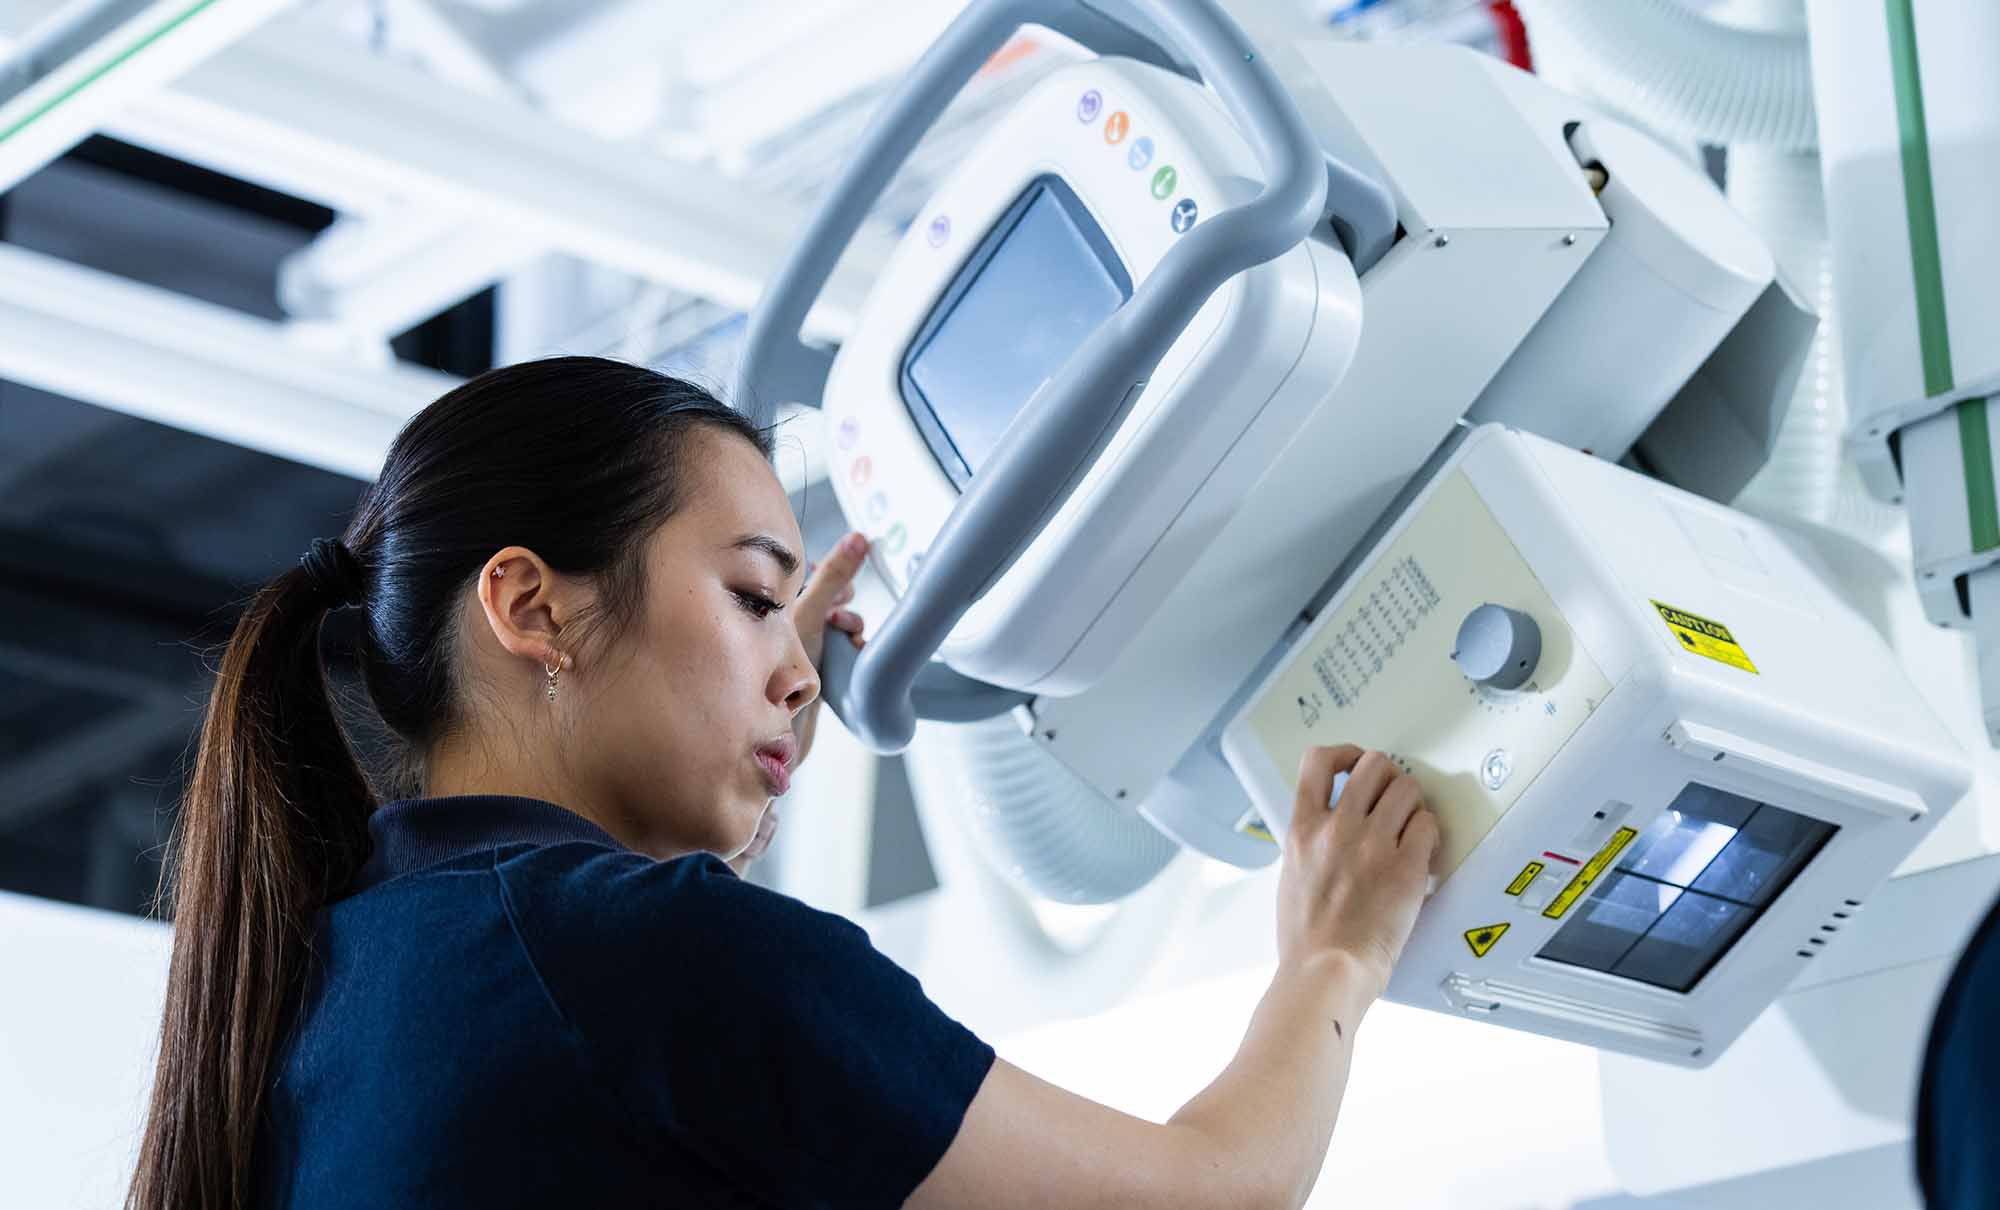 Sophie, a woman with long black hair pulled back in a pony tail, is checking the settings on a piece of medical imaging equipment.